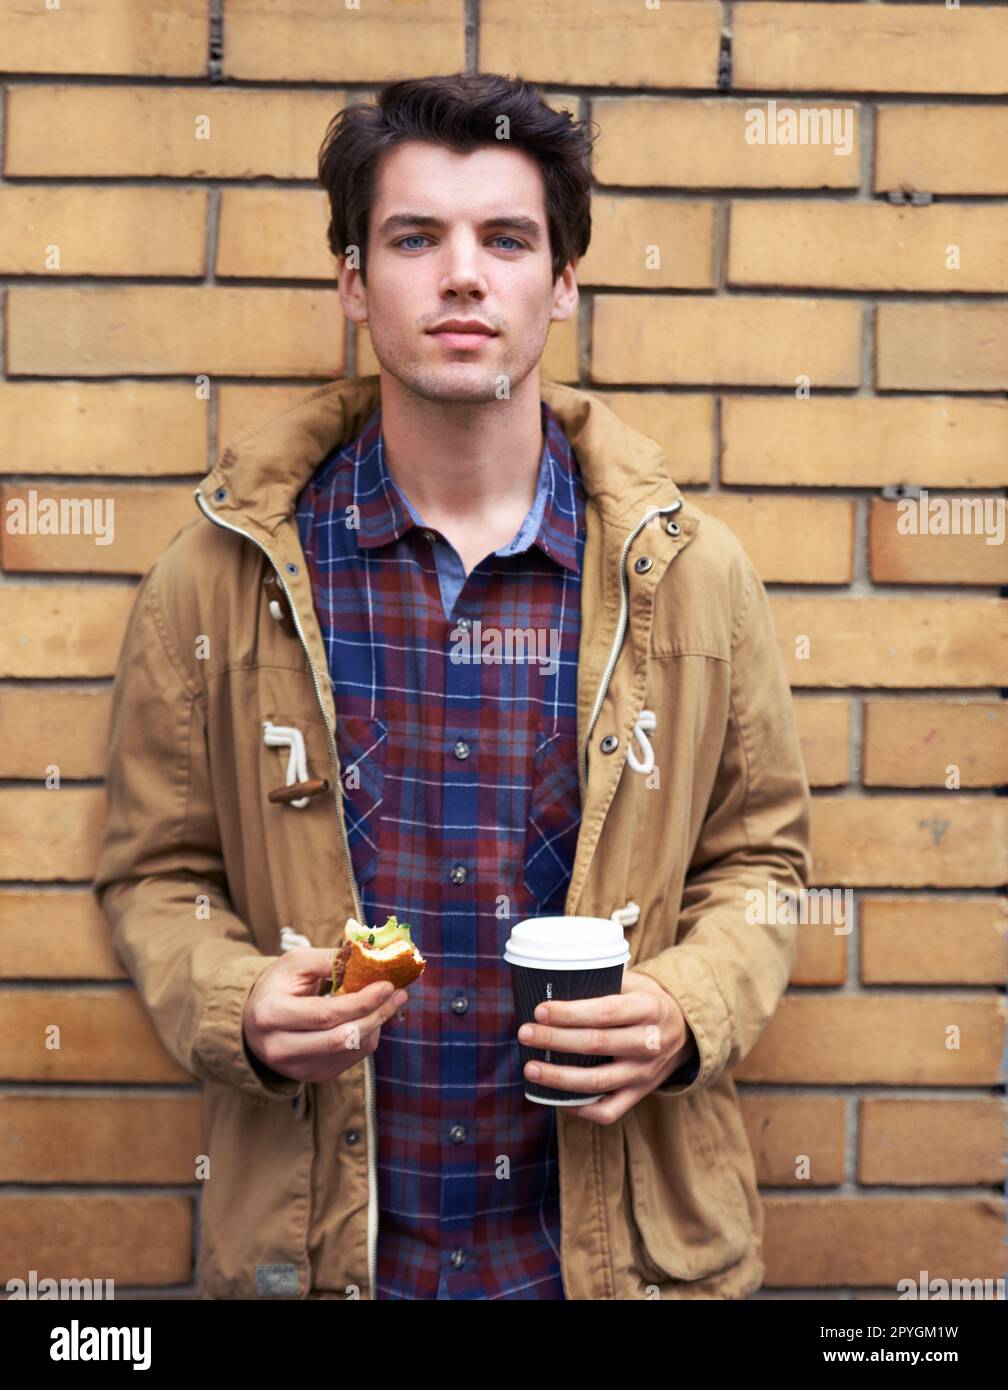 Food for his mind, body and soul. a young man standing outdoors with a half eaten burger and take away coffee. Stock Photo